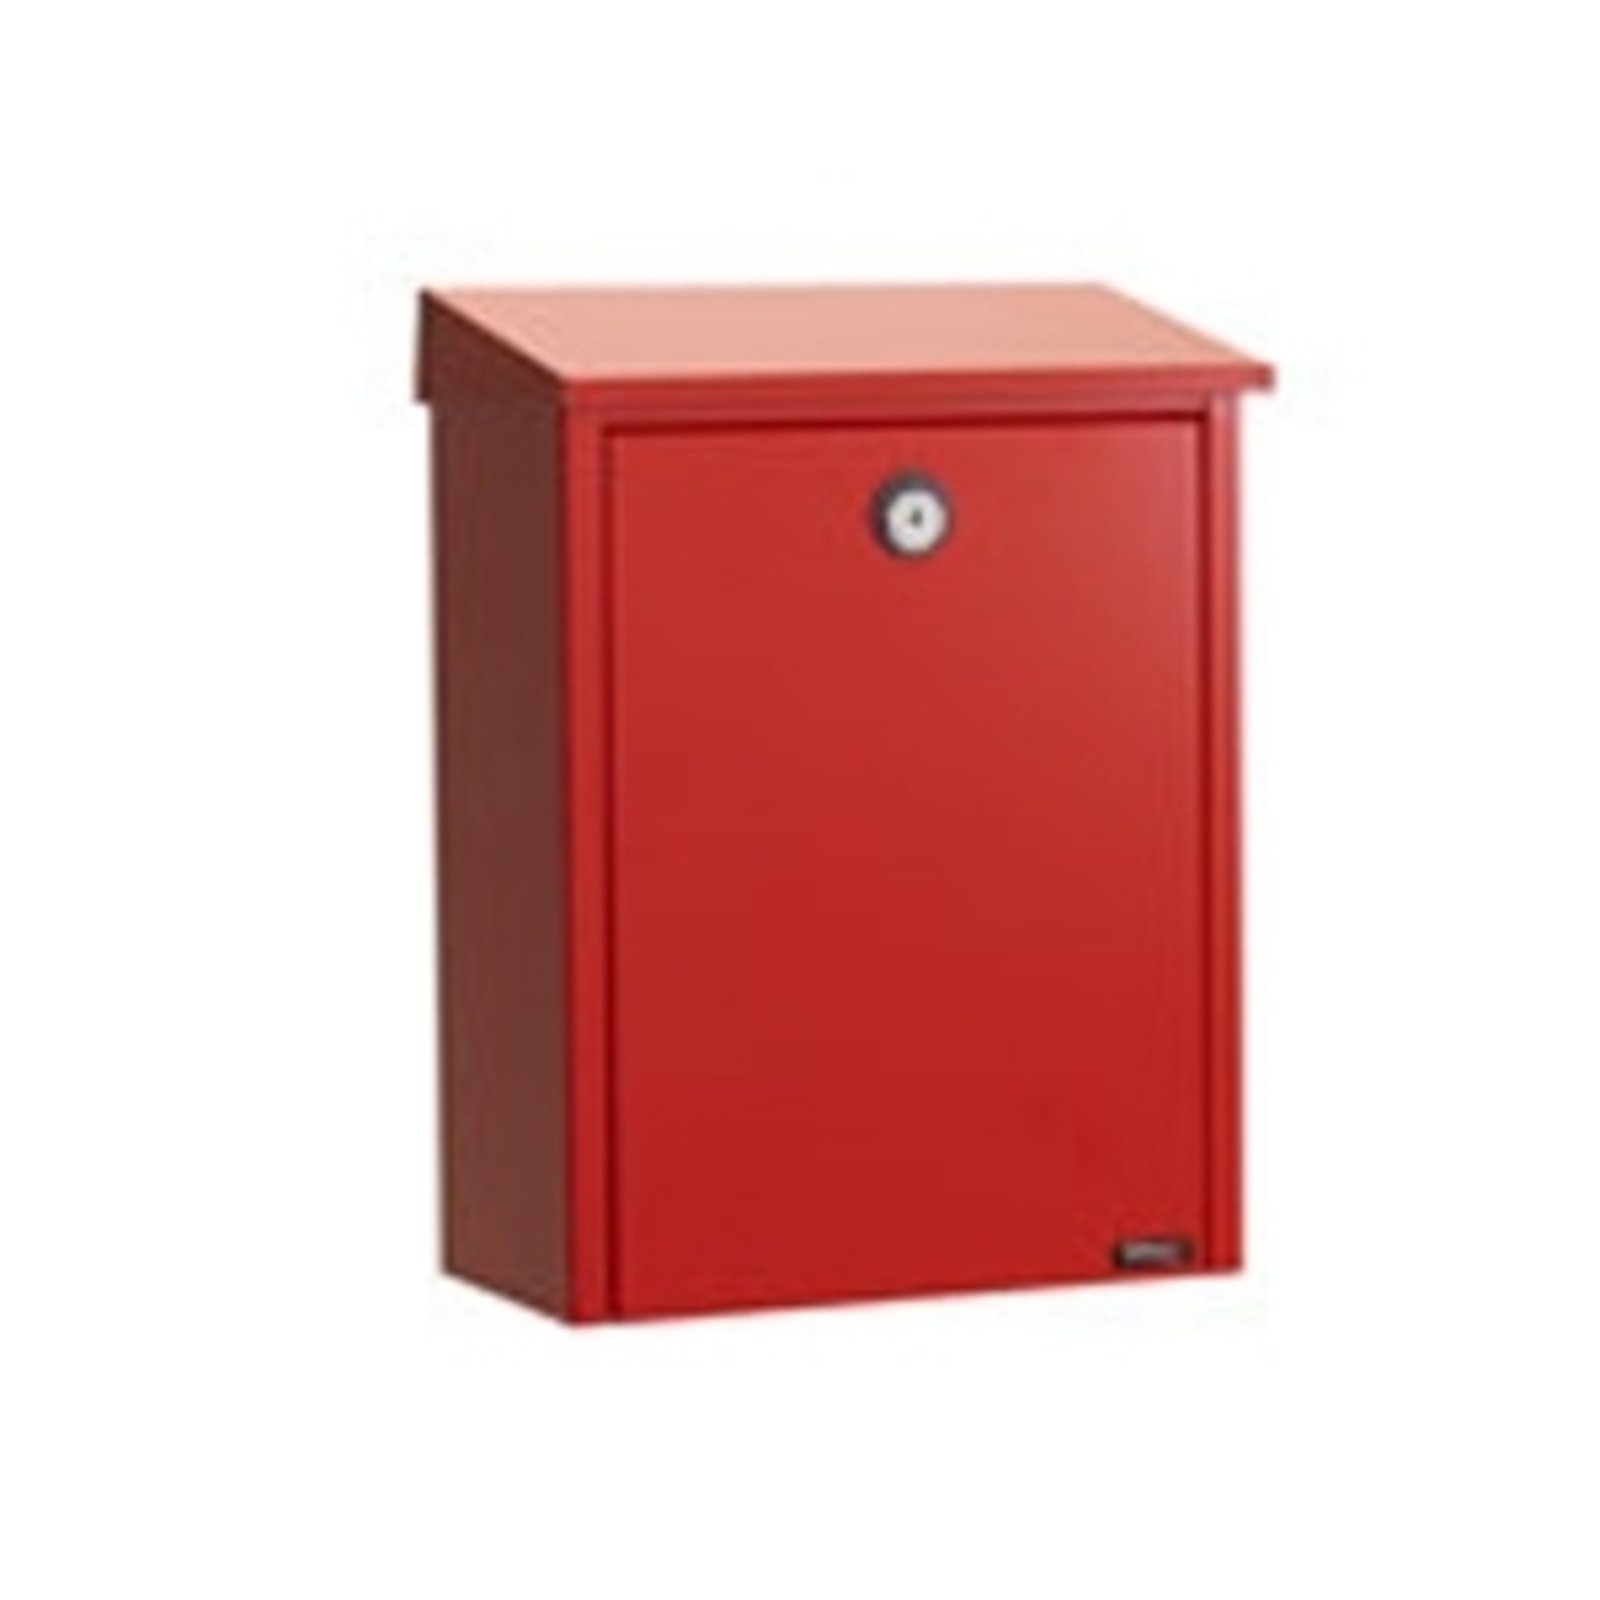 Simple letterbox made of steel, red